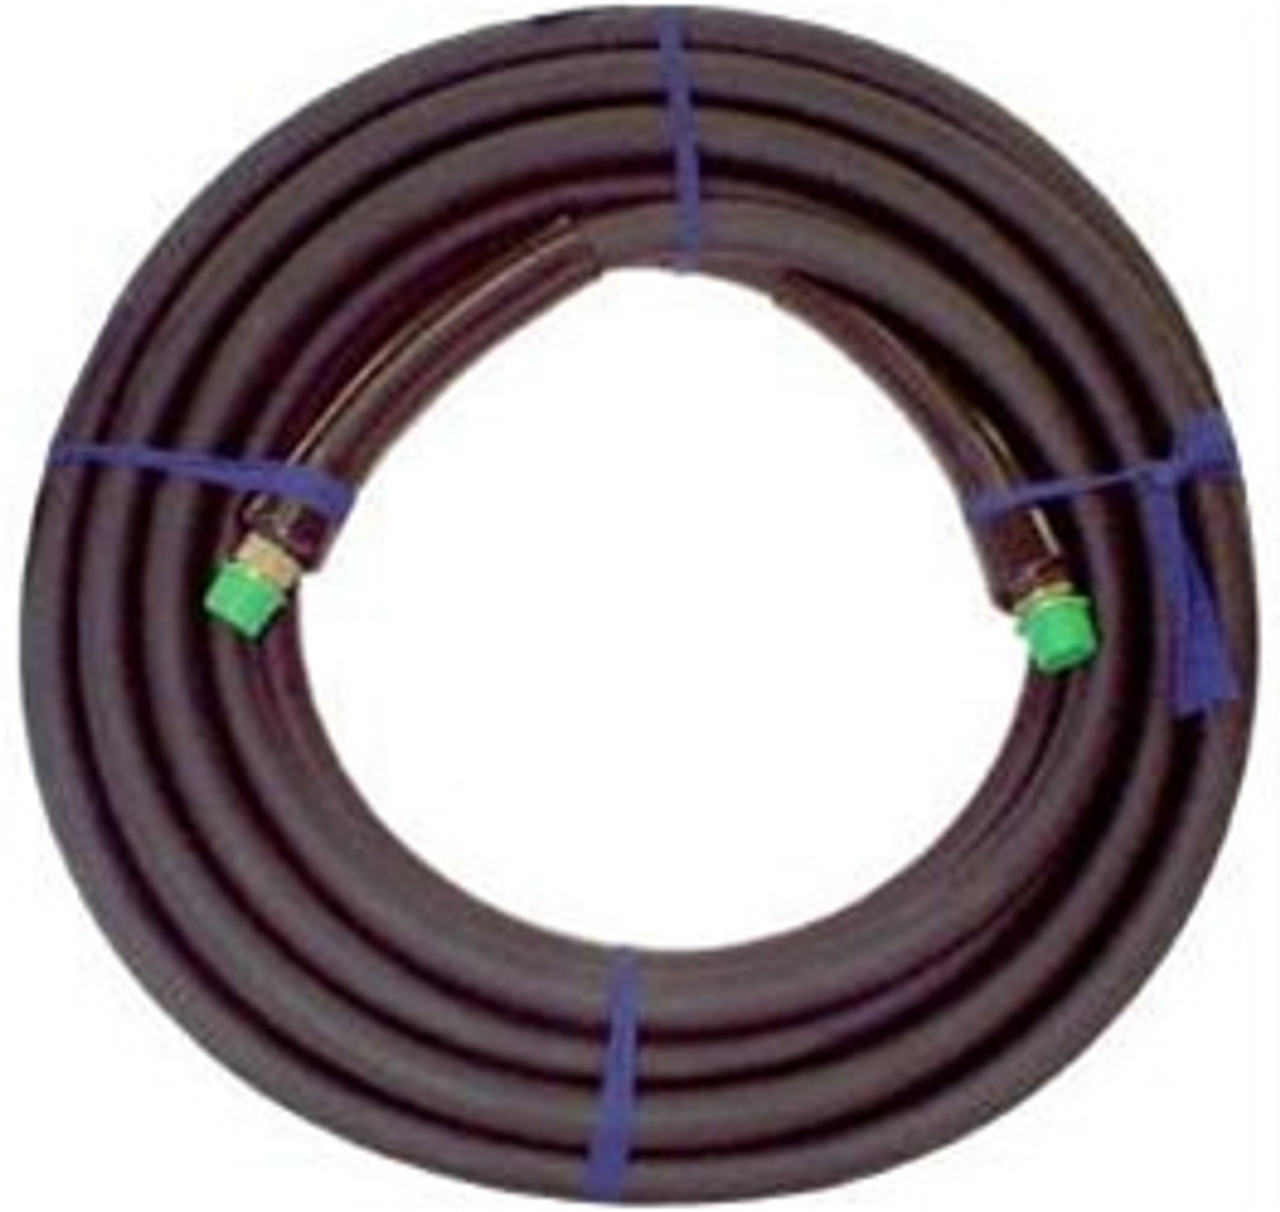 Steam Jenny JD7790-A 3000 PSI 3/8" Id X 50' Cold Pressure Washer Hose